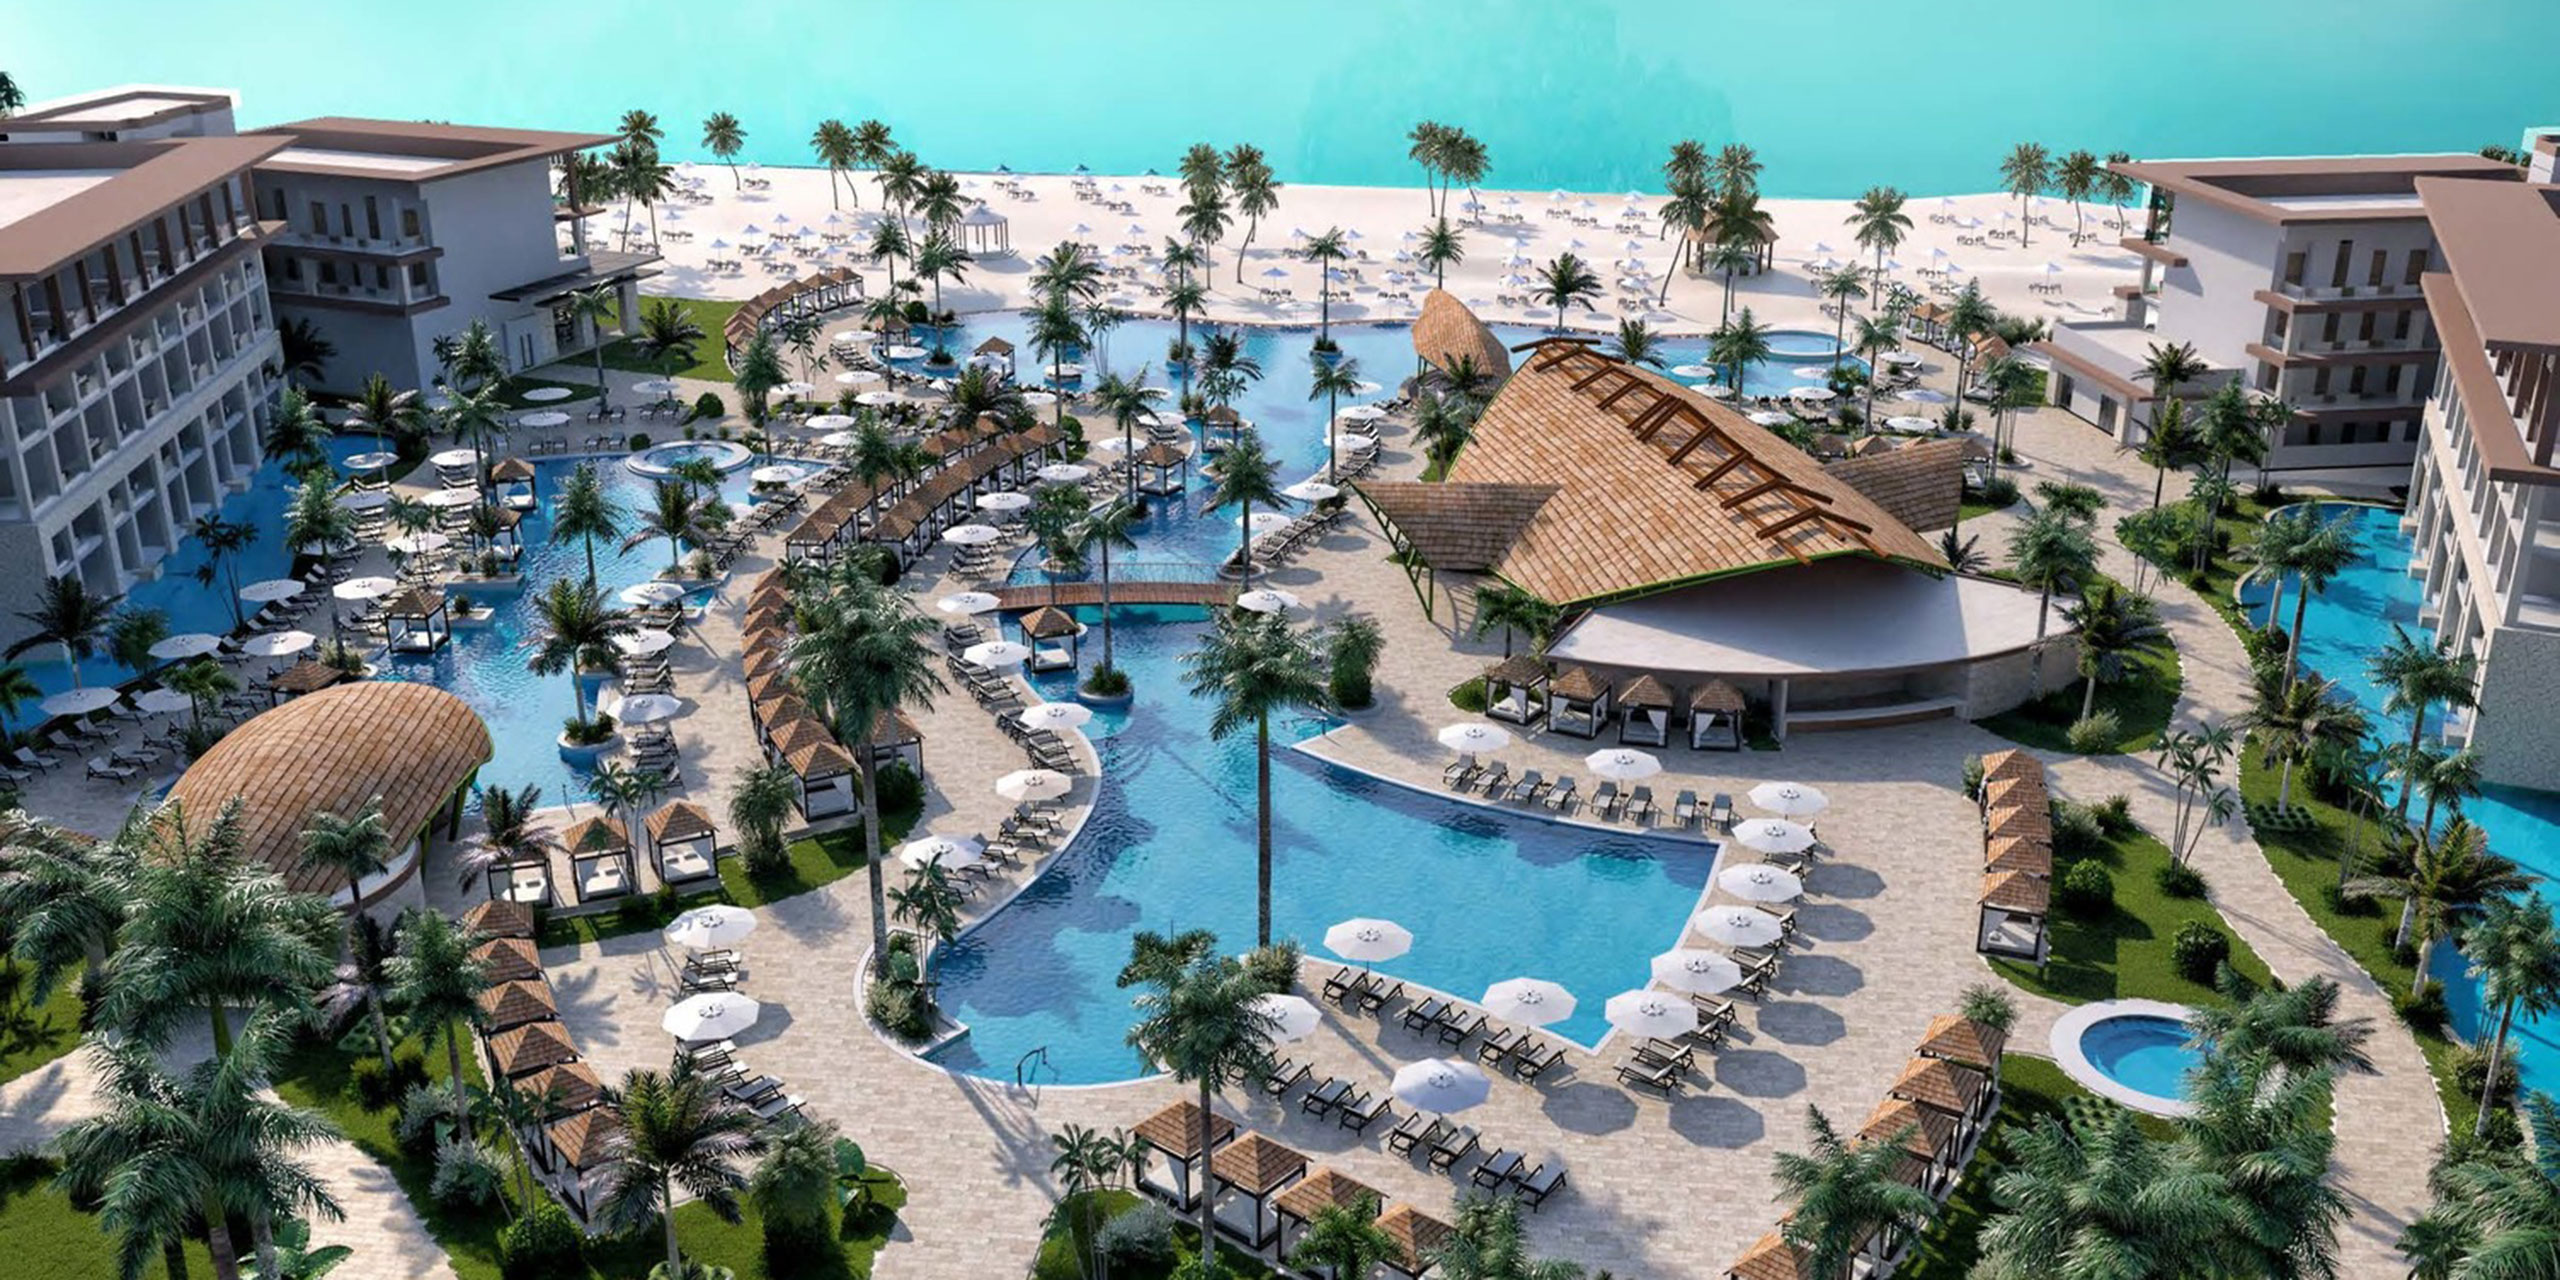 New All Inclusive Resorts Opening in 2019 and 2020